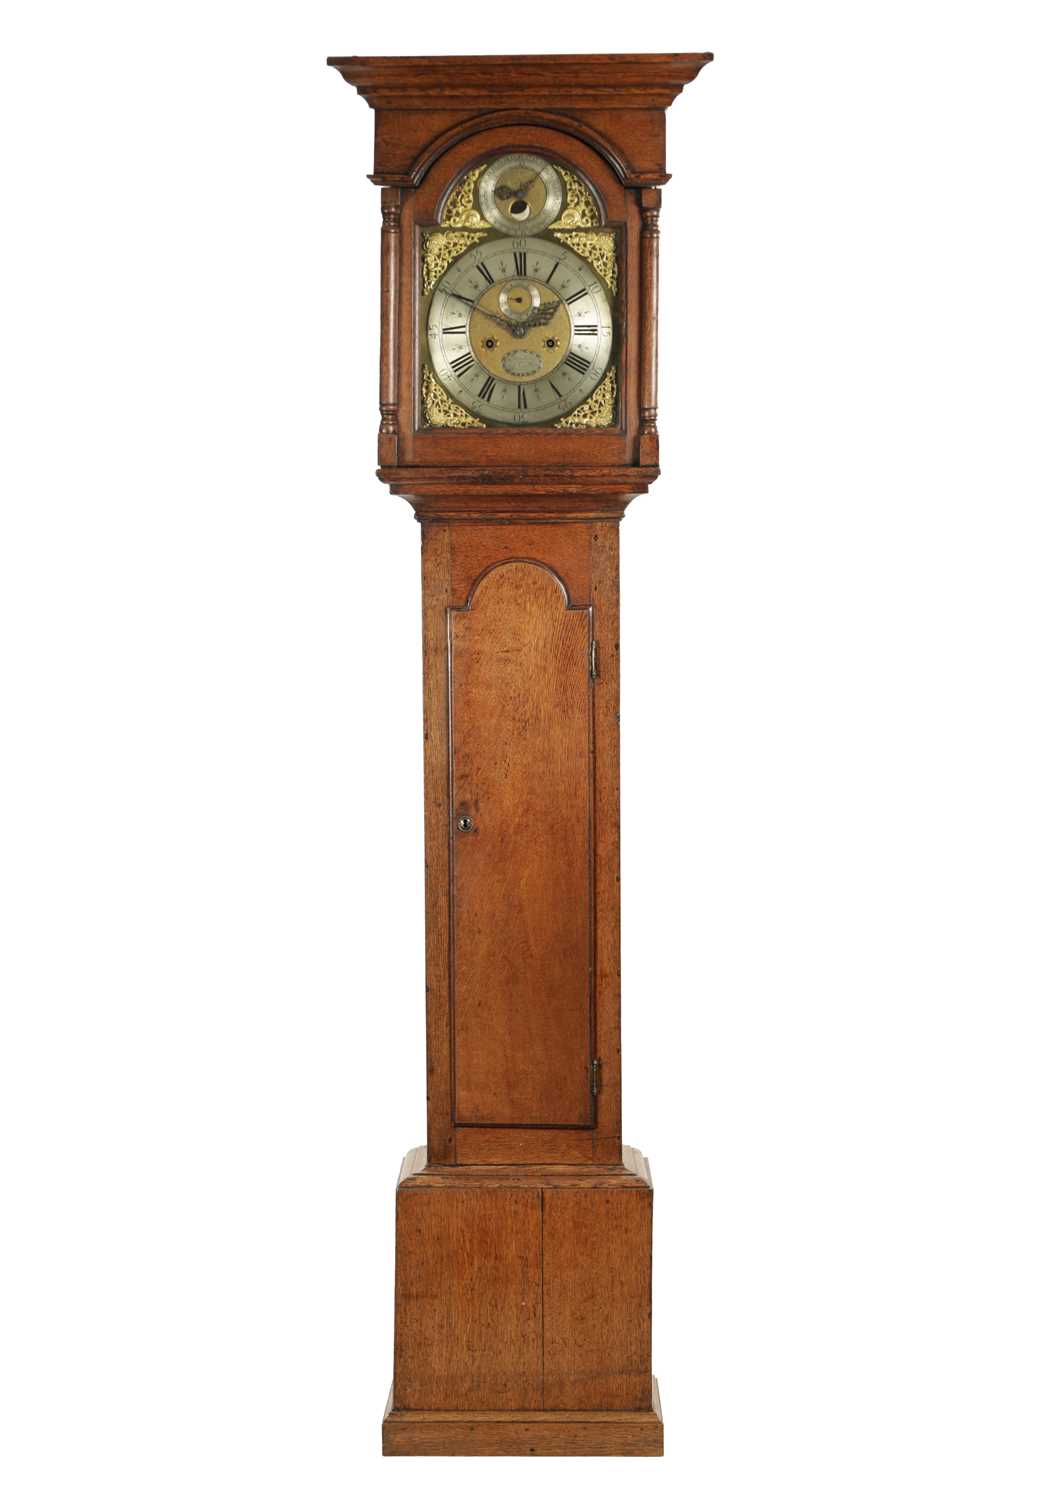 JAMES WOLLEY (WOOLLEY), CODNOR. AN EARLY 18TH CENTURY EIGHT DAY LONGCASE CLOCK WITH MOONPHASE